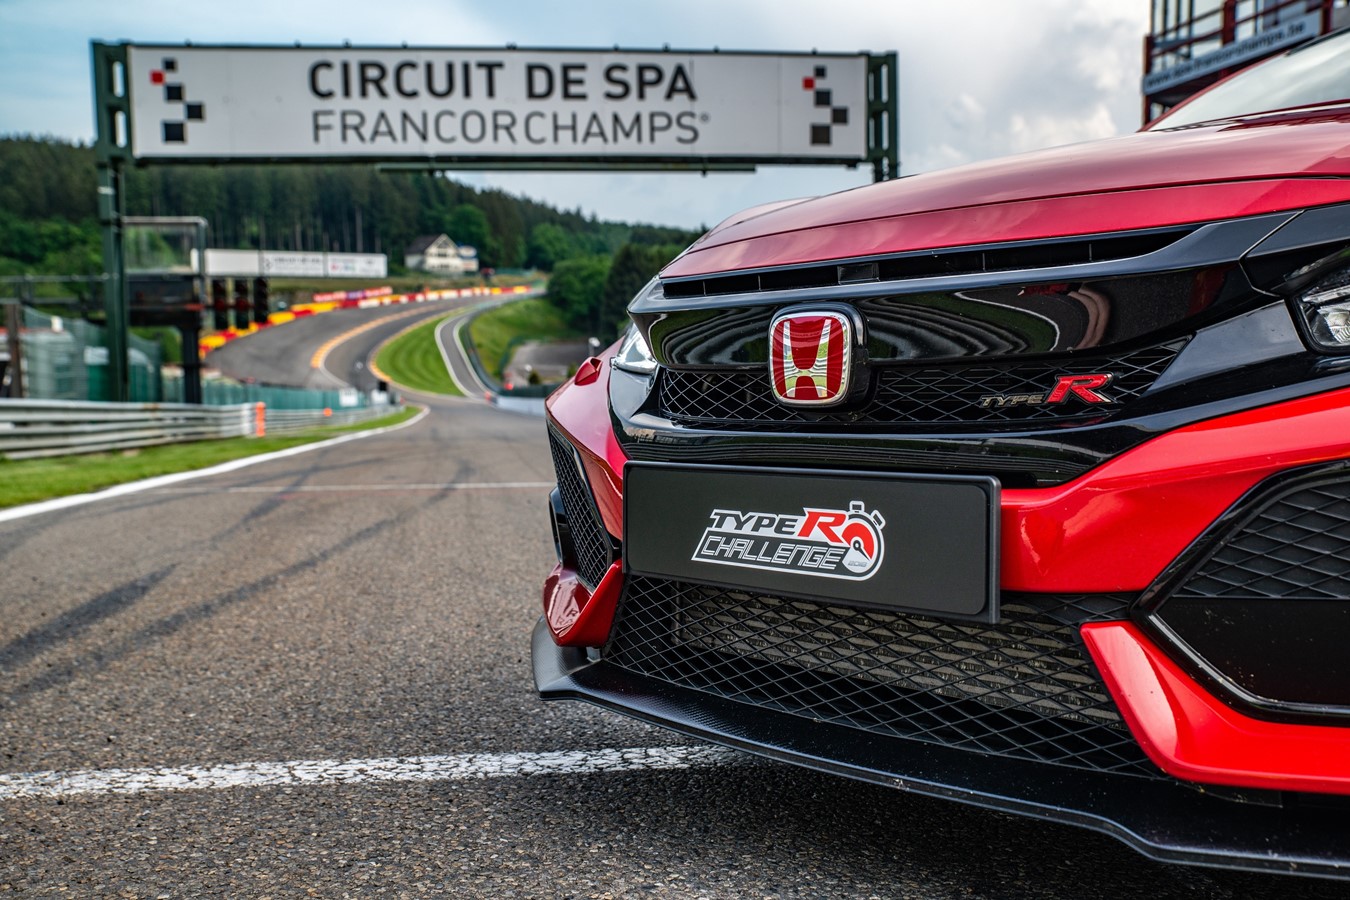 ‘Type R Challenge 2018’ hits Eau Rouge: Japanese Super GT star Bertrand Baguette takes lap record at Spa-Francorchamps